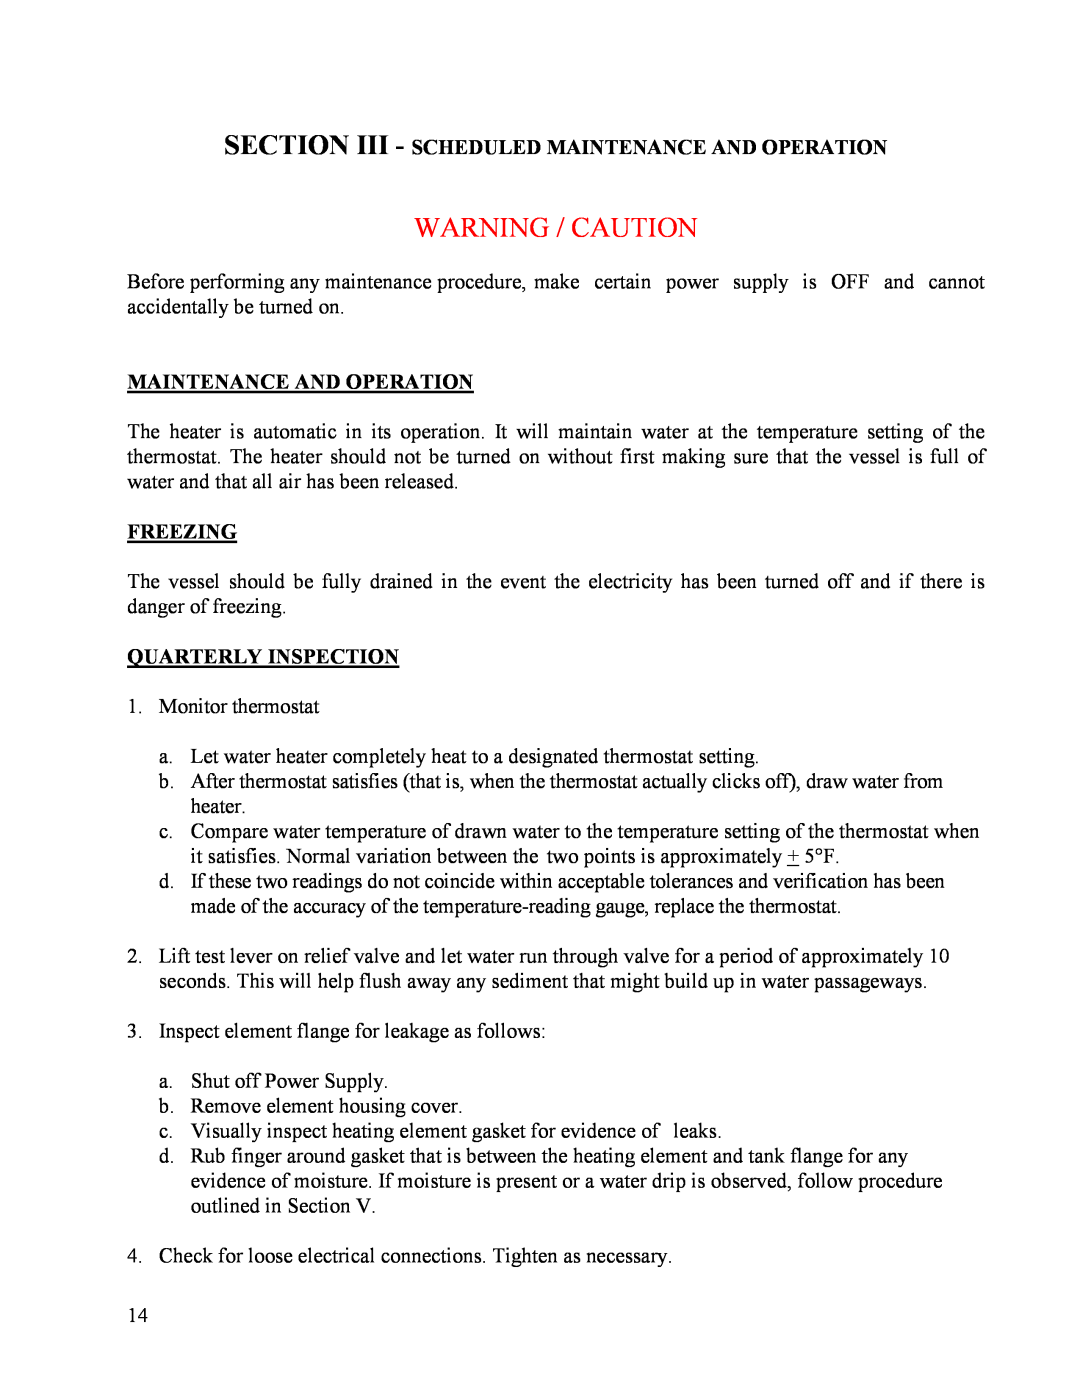 Hubbell CR manual Section Iii - Scheduled Maintenance And Operation, Freezing, Quarterly Inspection, Warning / Caution 